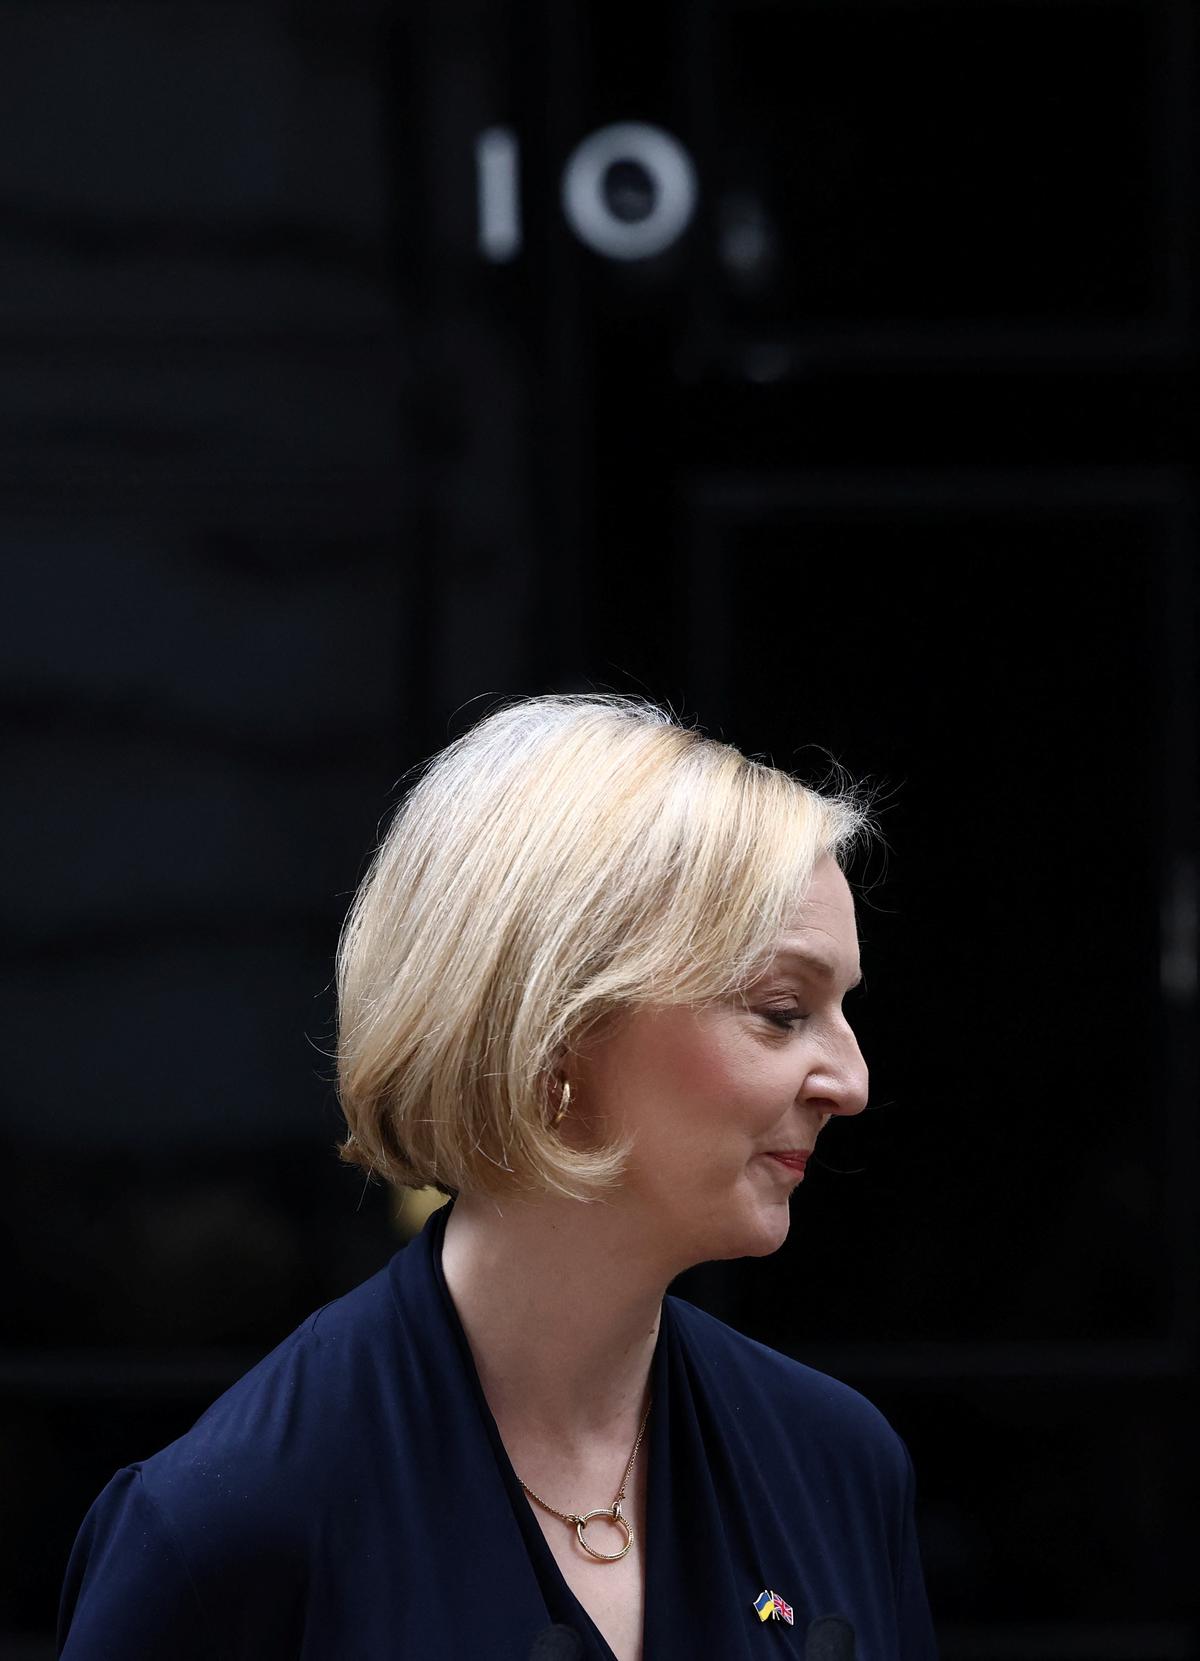 Liz Truss promised U.K. a shakeup — but was forced out instead